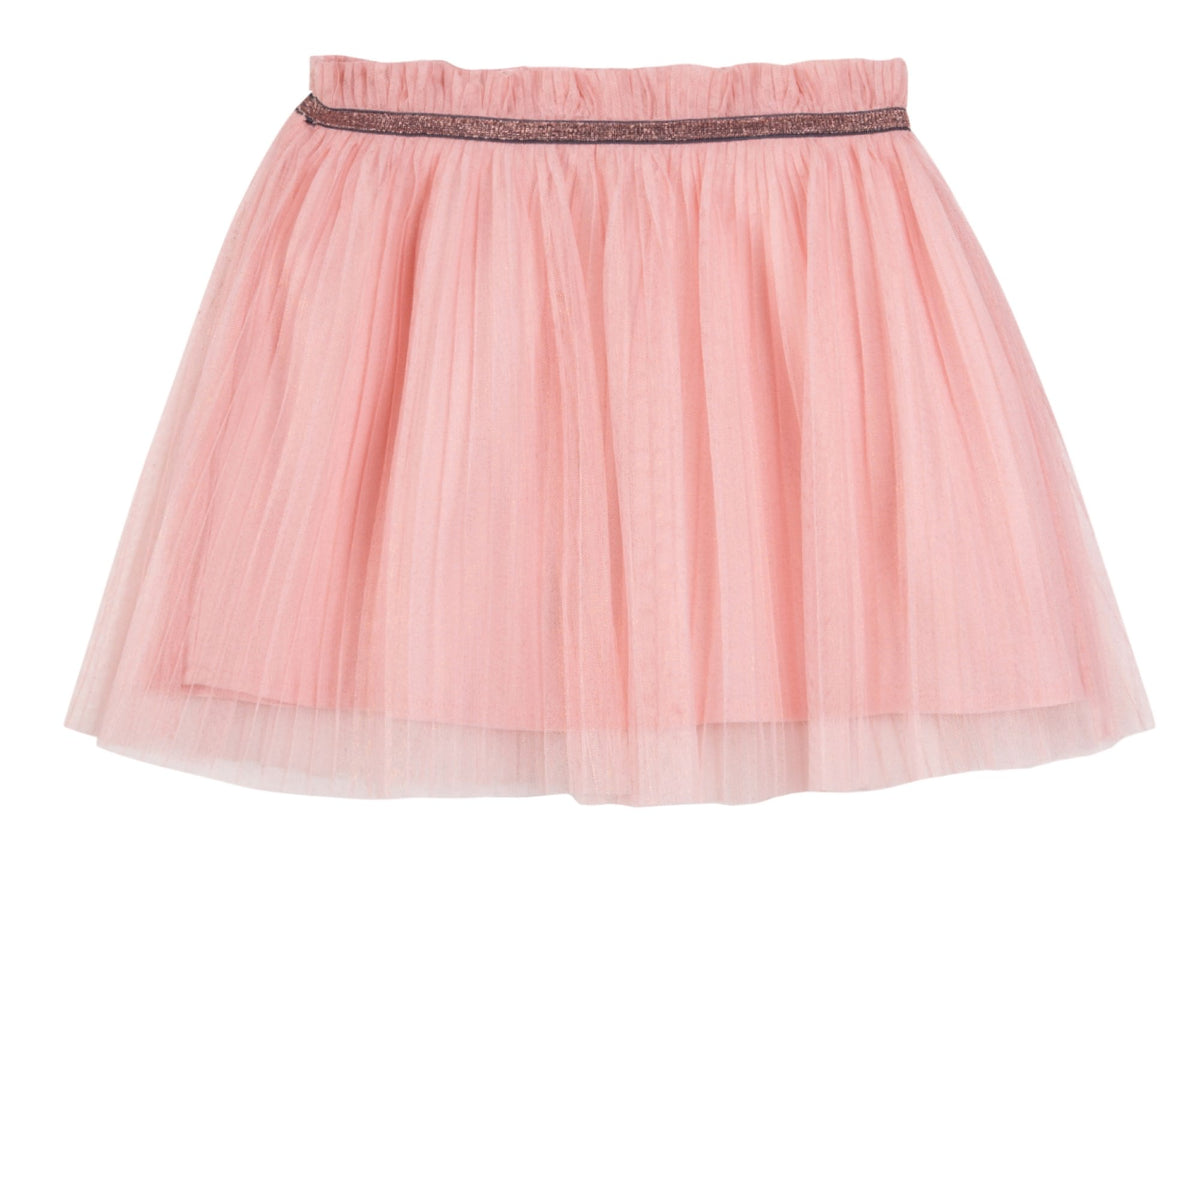 Girls Pink Petticoat Skirt With Tule